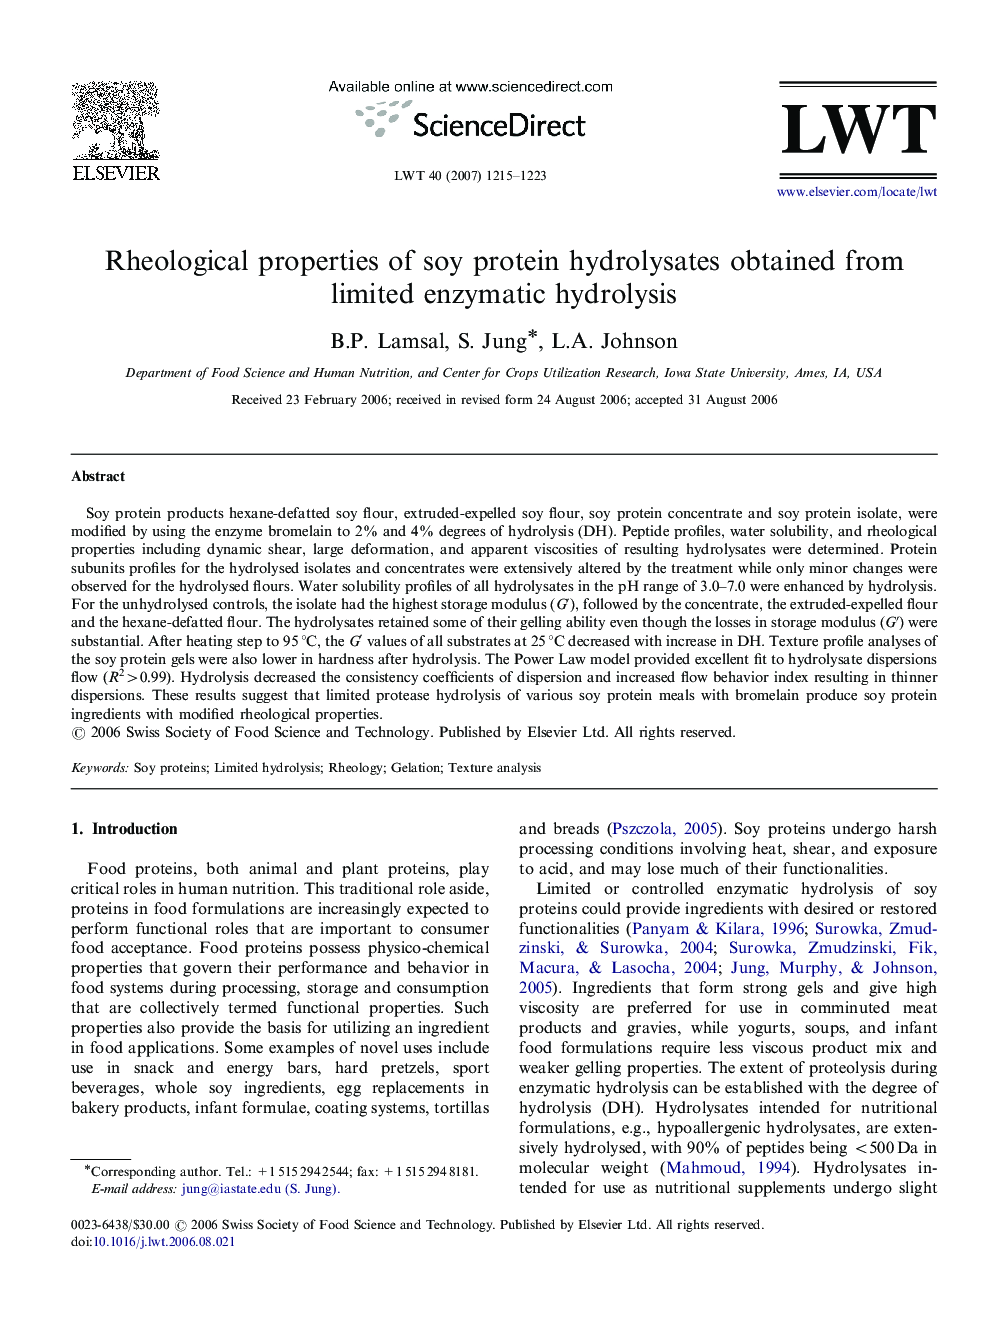 Rheological properties of soy protein hydrolysates obtained from limited enzymatic hydrolysis